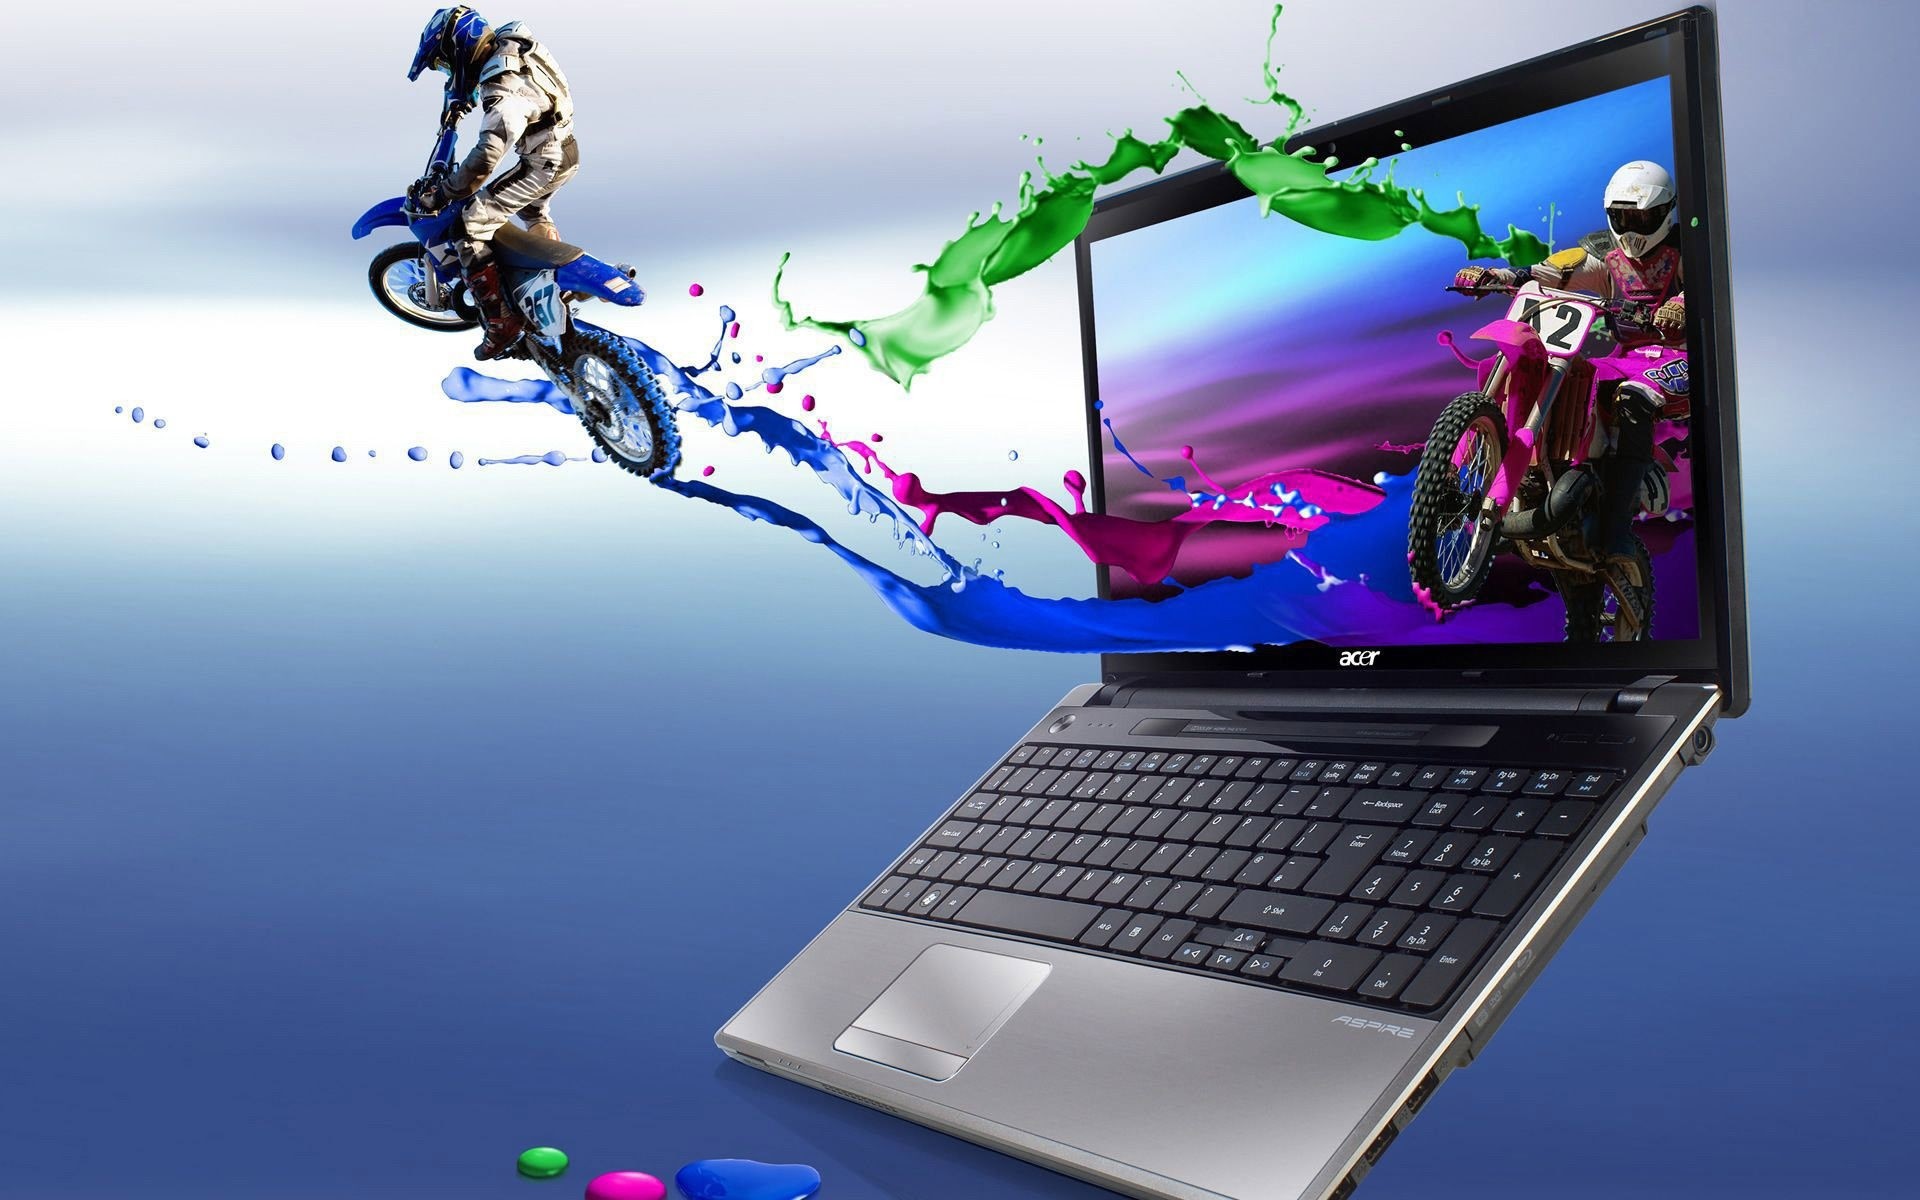 1920x1200 hp pavilion wallpapers widescreen - Full HD Wallpapers for Laptop